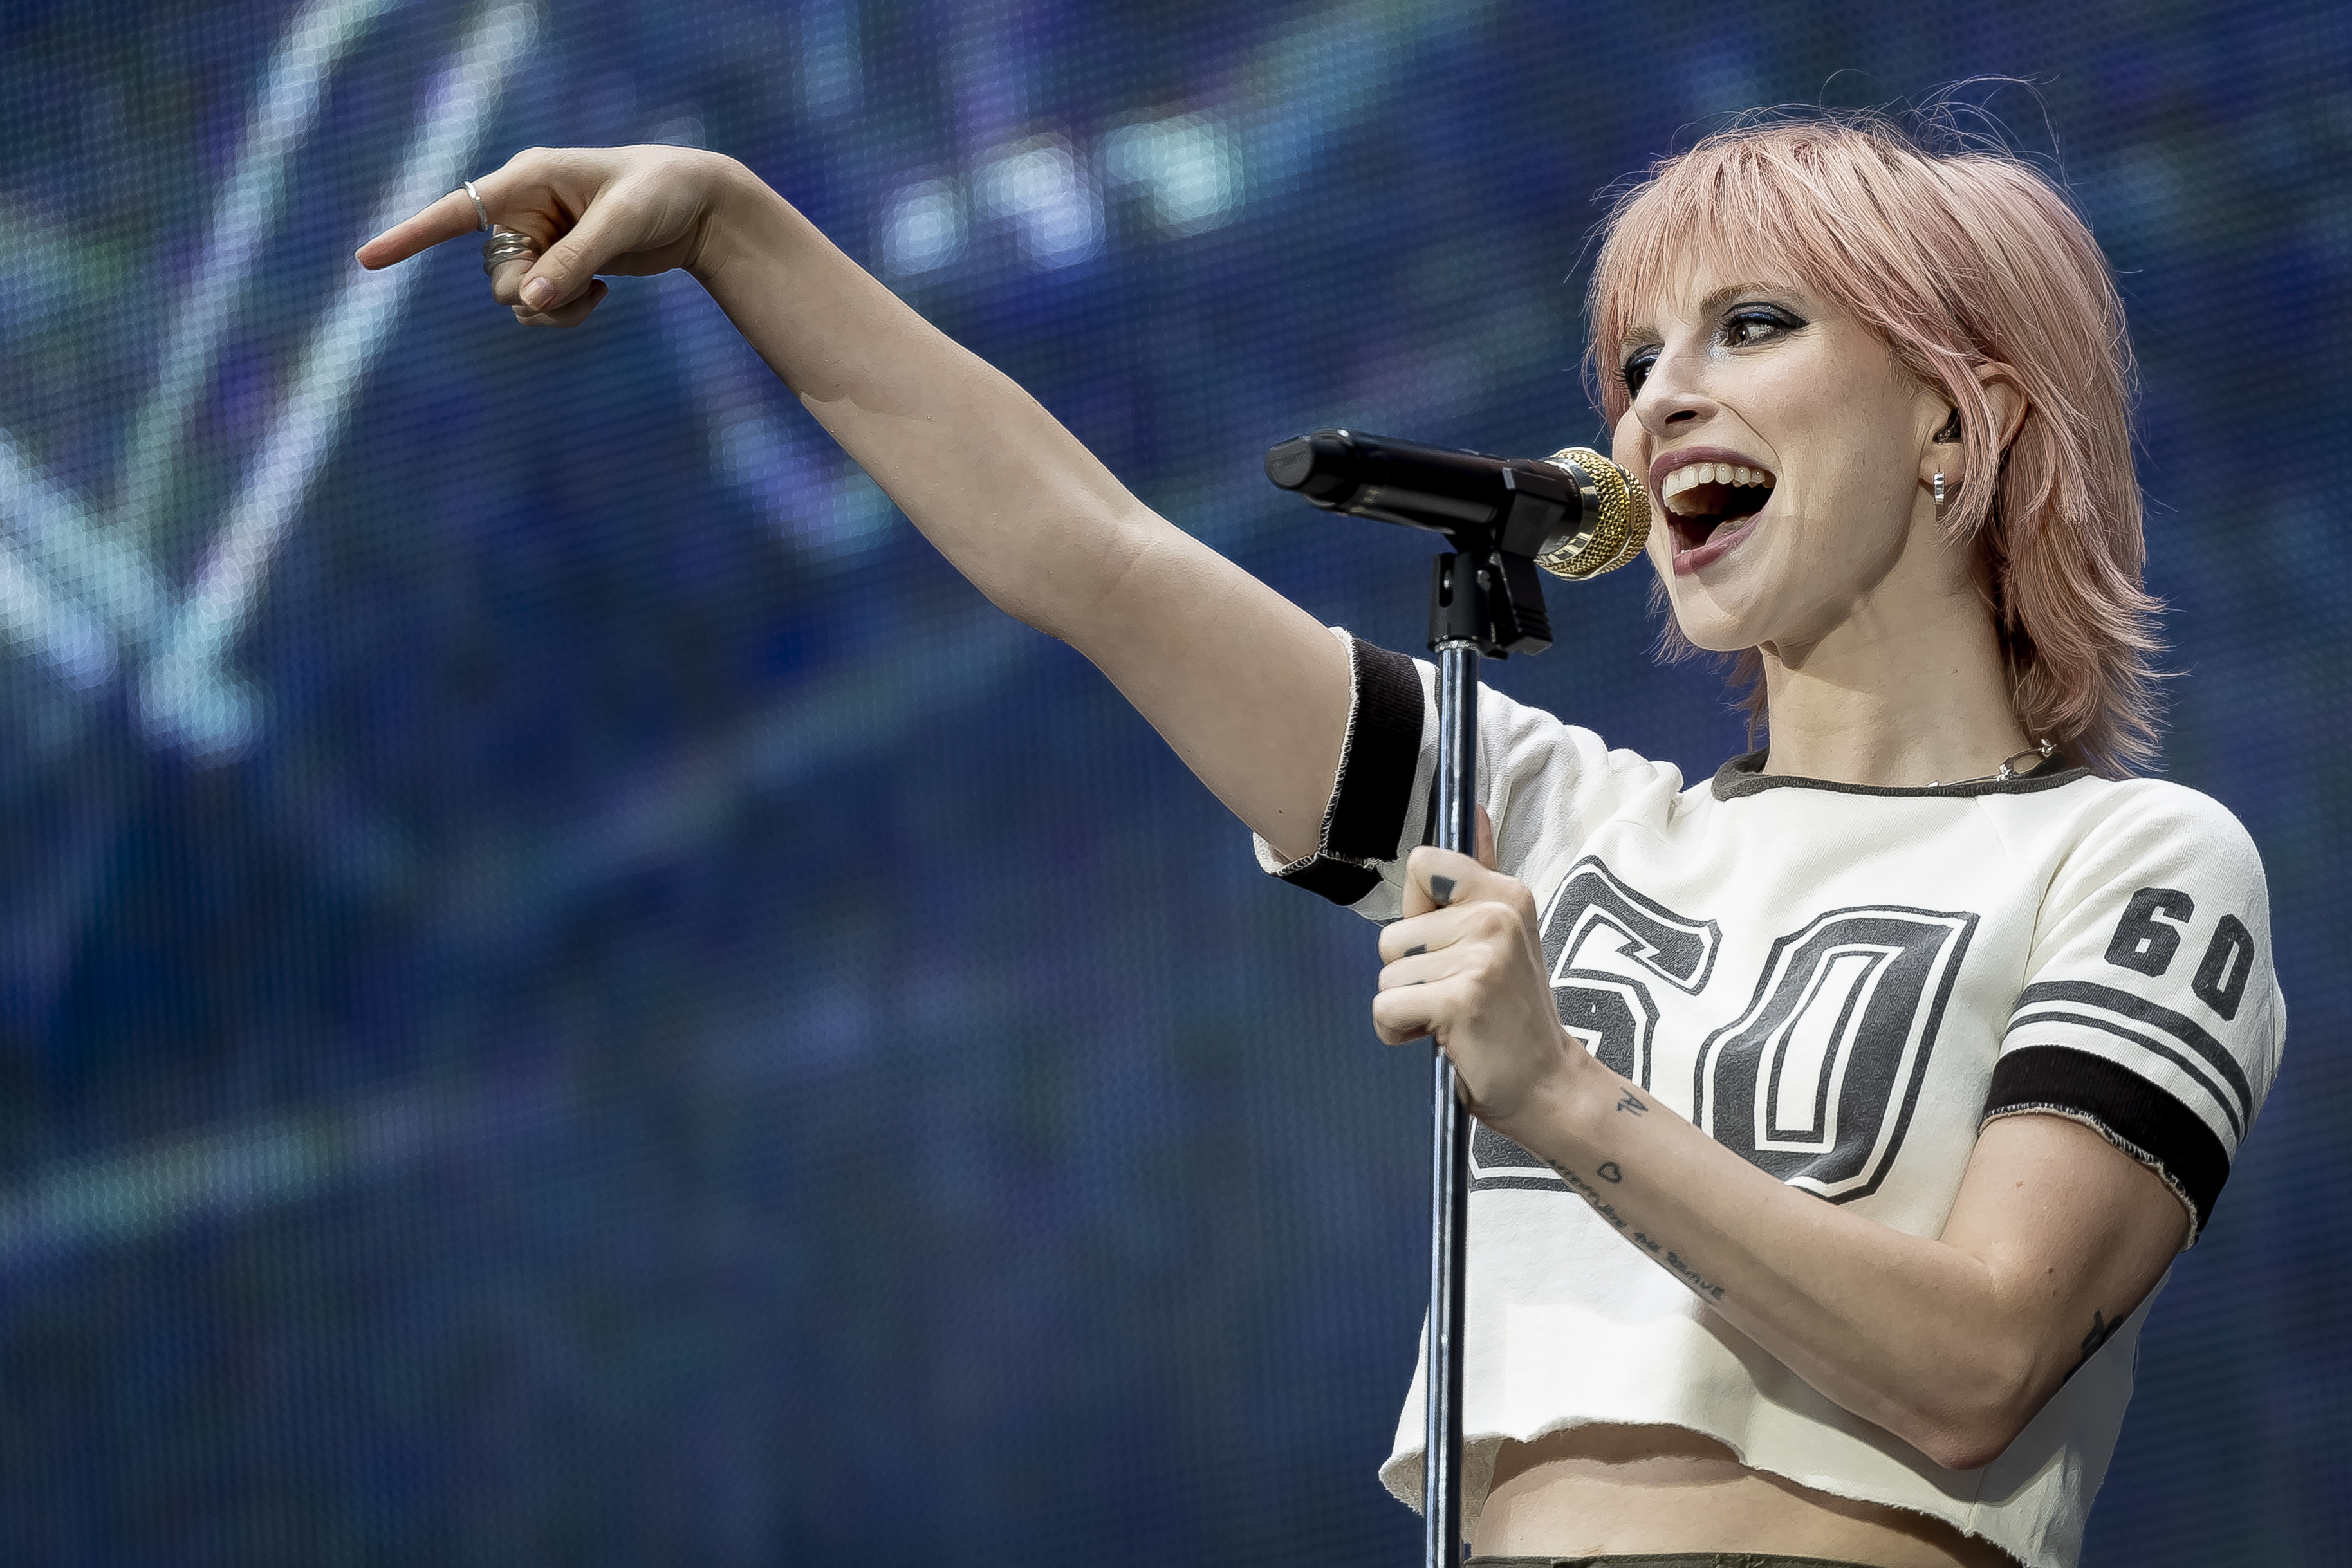 Lead singer Hayley Williams is good friends with Taylor